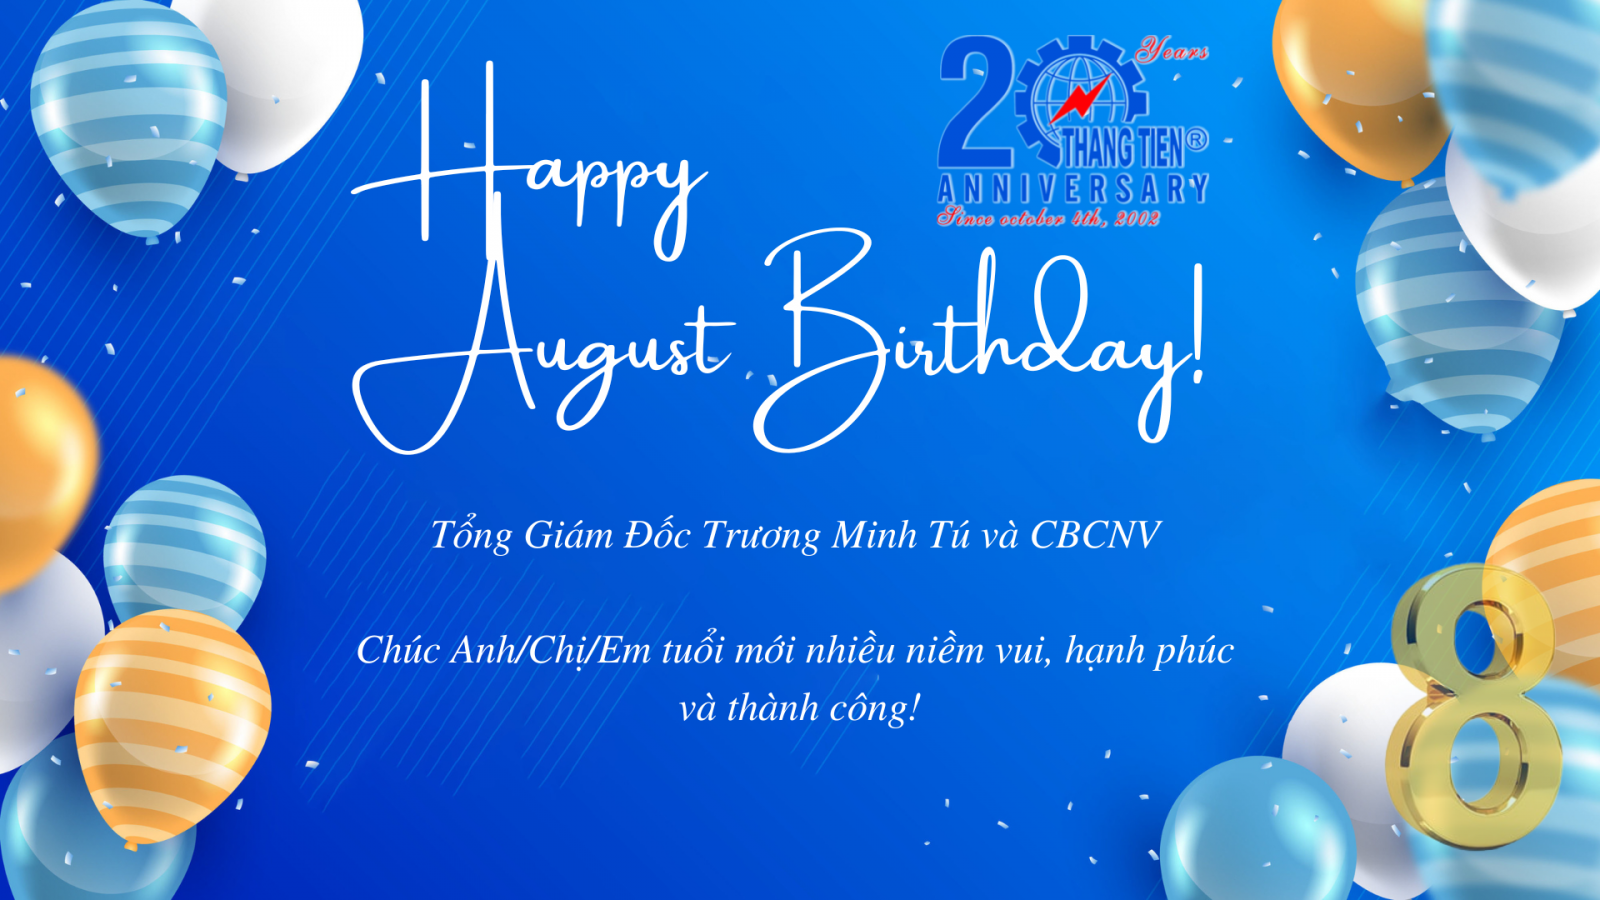 THANG TIEN - HAPPY AUGUST BIRTHDAY 